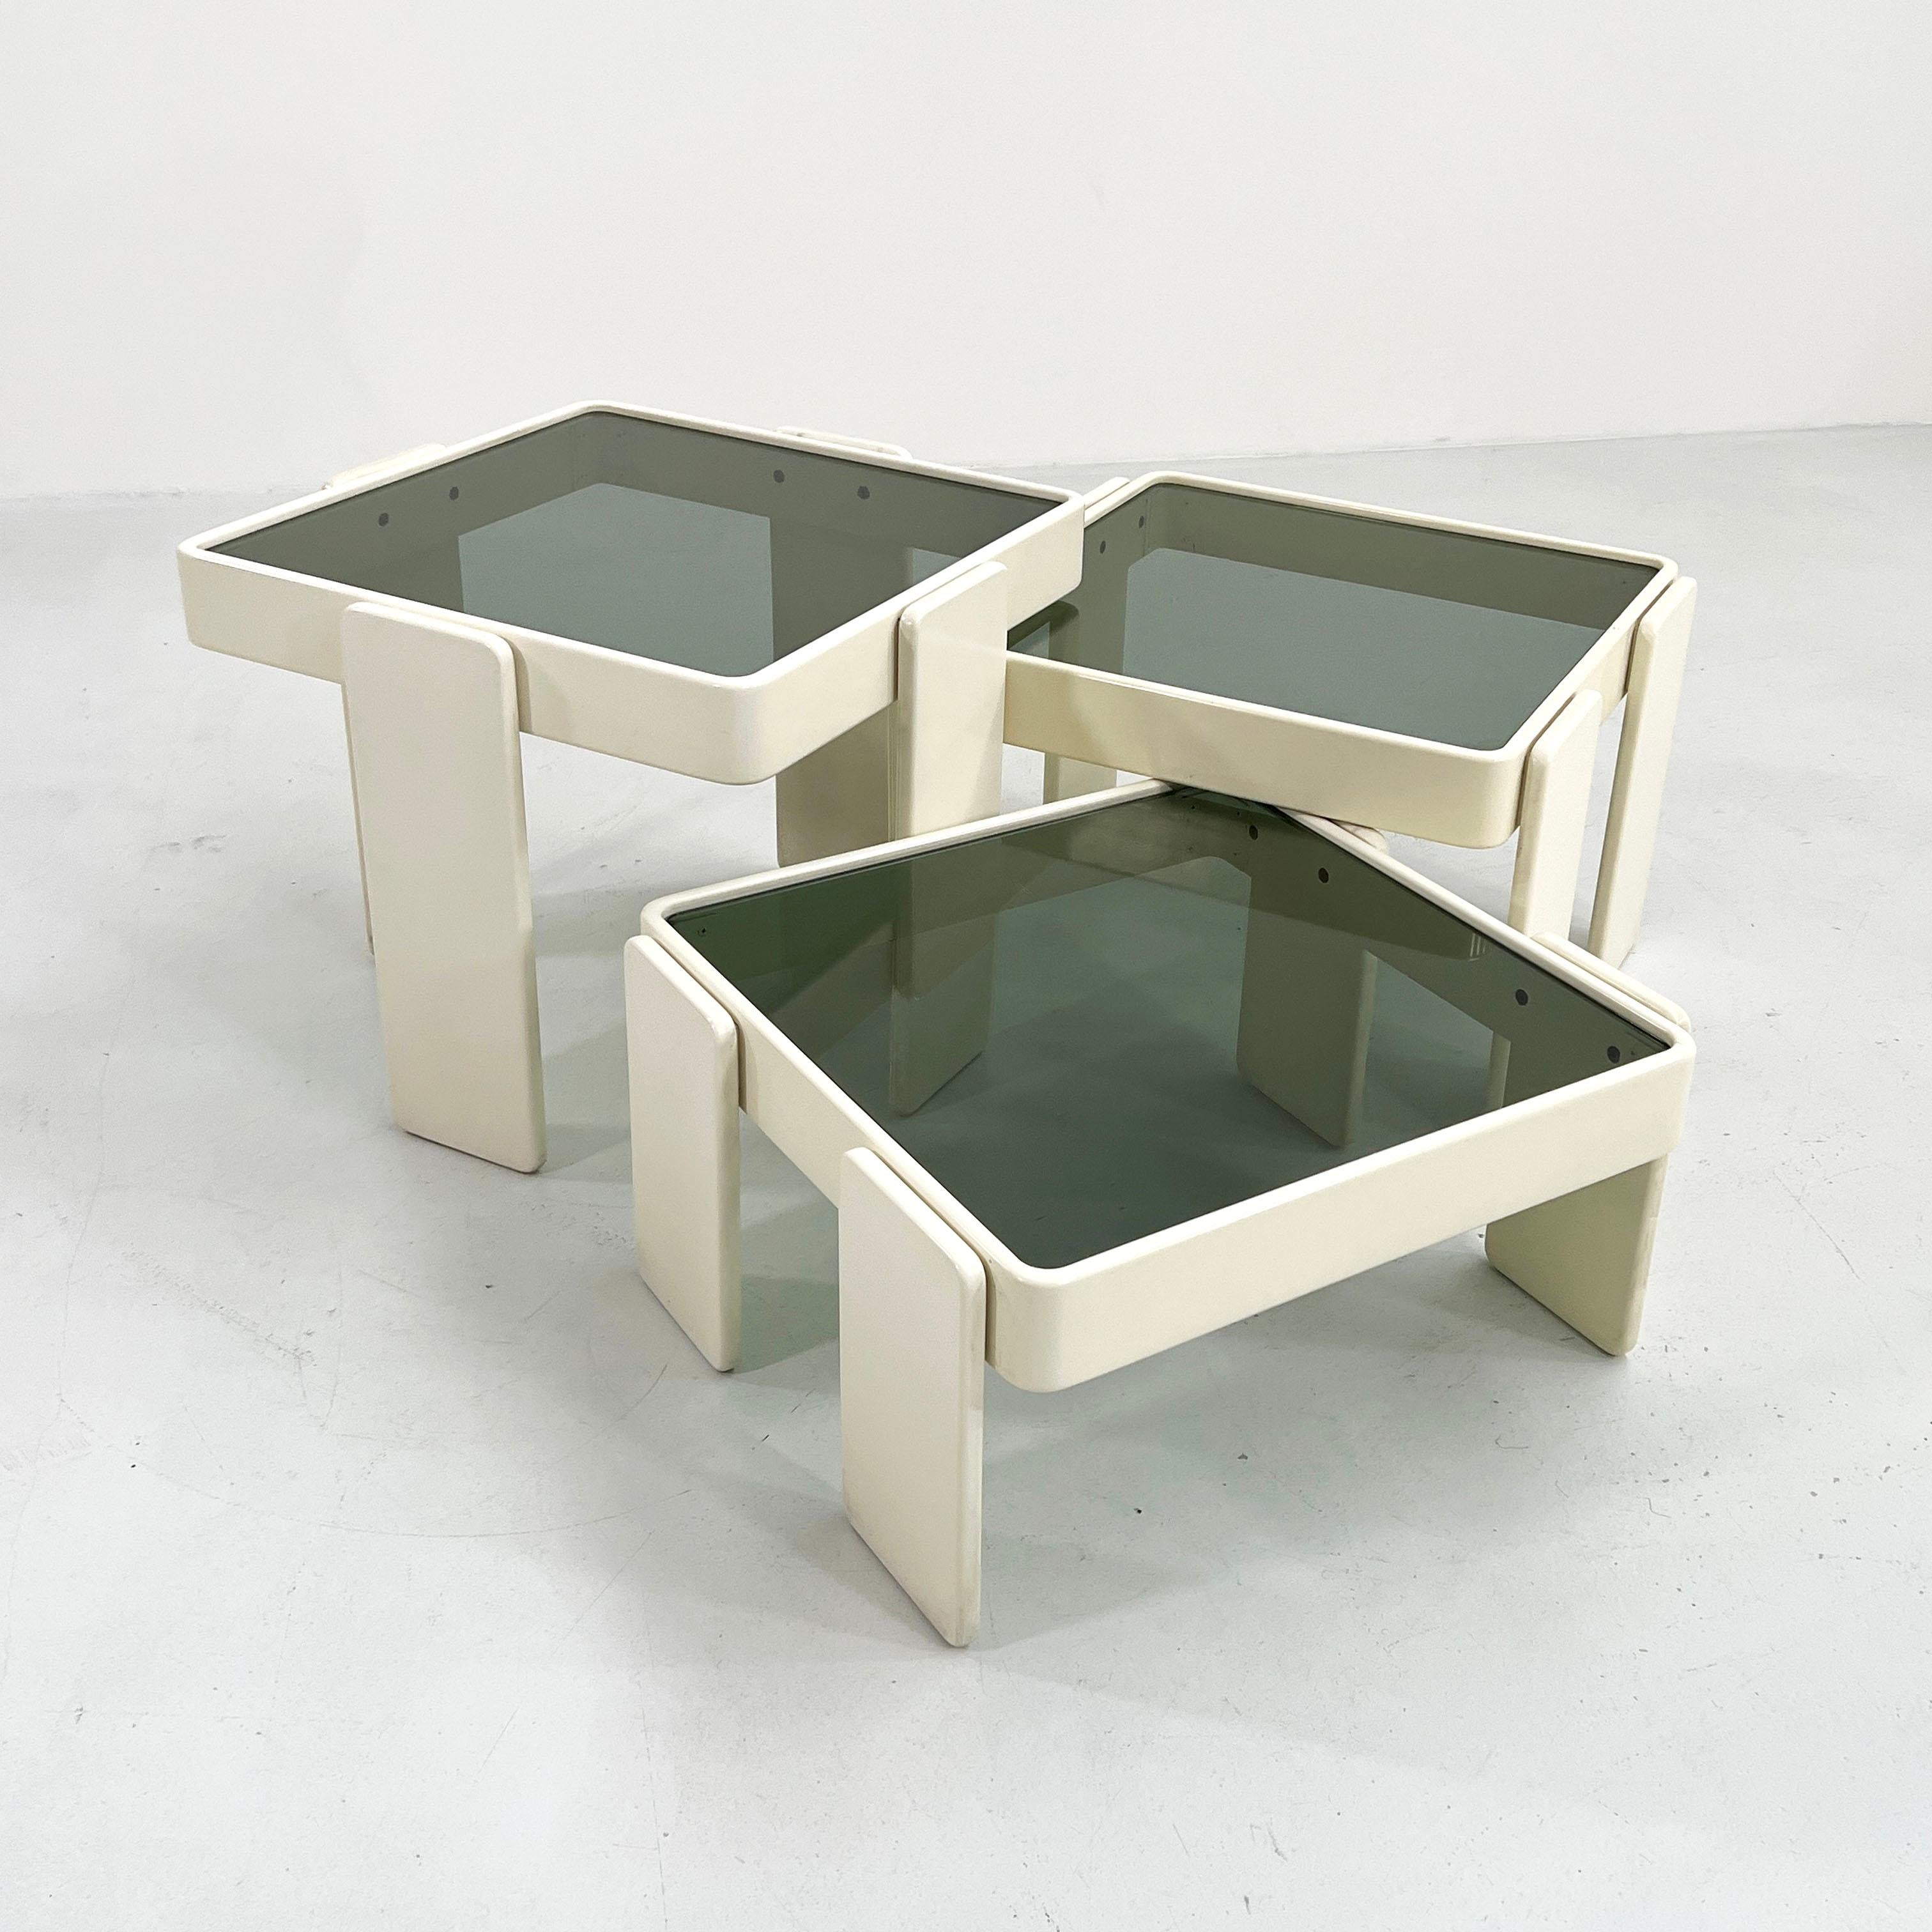 Designer - Gianfranco Frattini
Producer - Cassina 
Model - Nesting Tables
Design Period - Seventies
Measurements - Width 58 cm x Depth 58 cm x Height 46 cm
Materials - Painted Wood, Glass
Color - White, Smoke
Light wear consistent with age